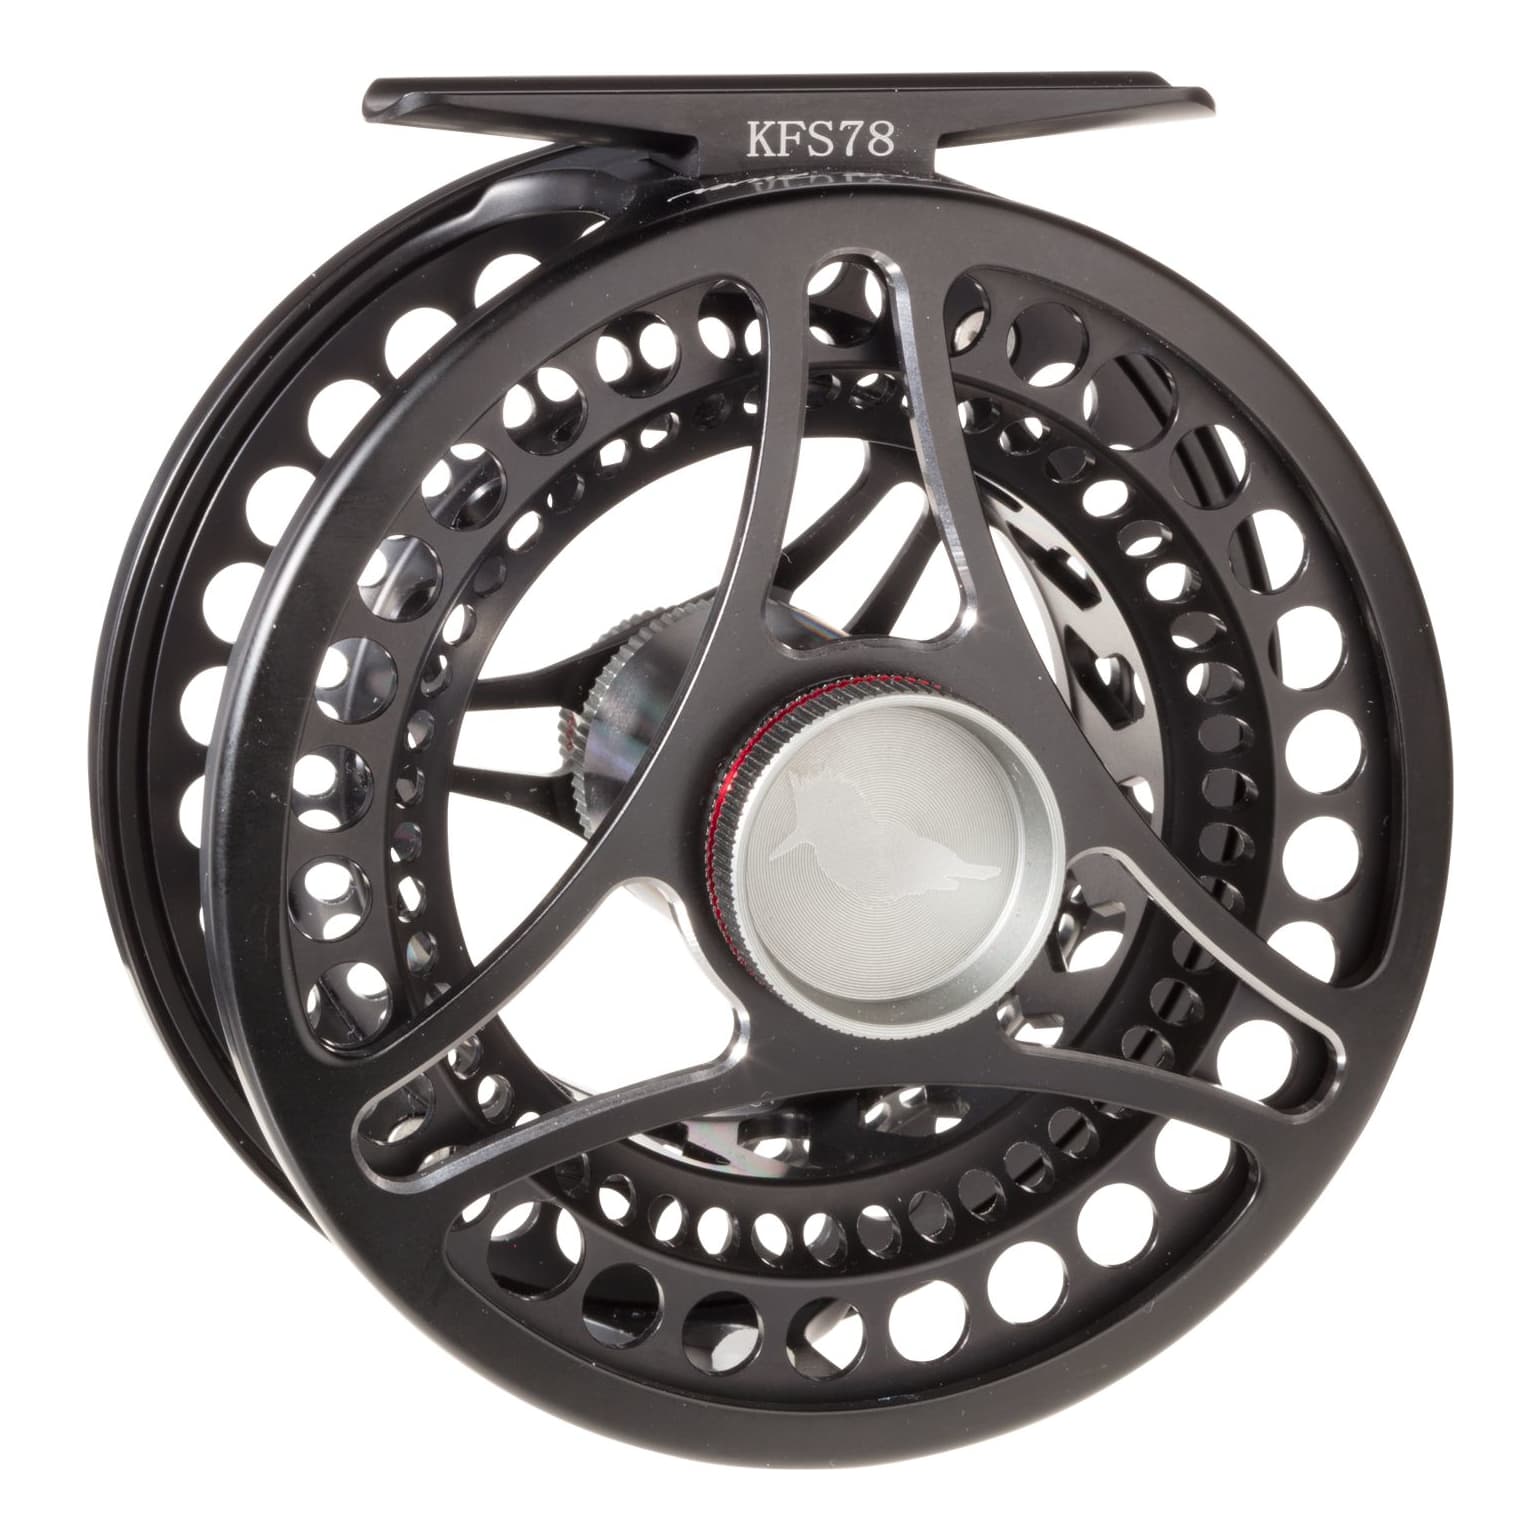 White River Fly Shop LUNE Reel/Fenwick AETOS Fly Rod Outfit